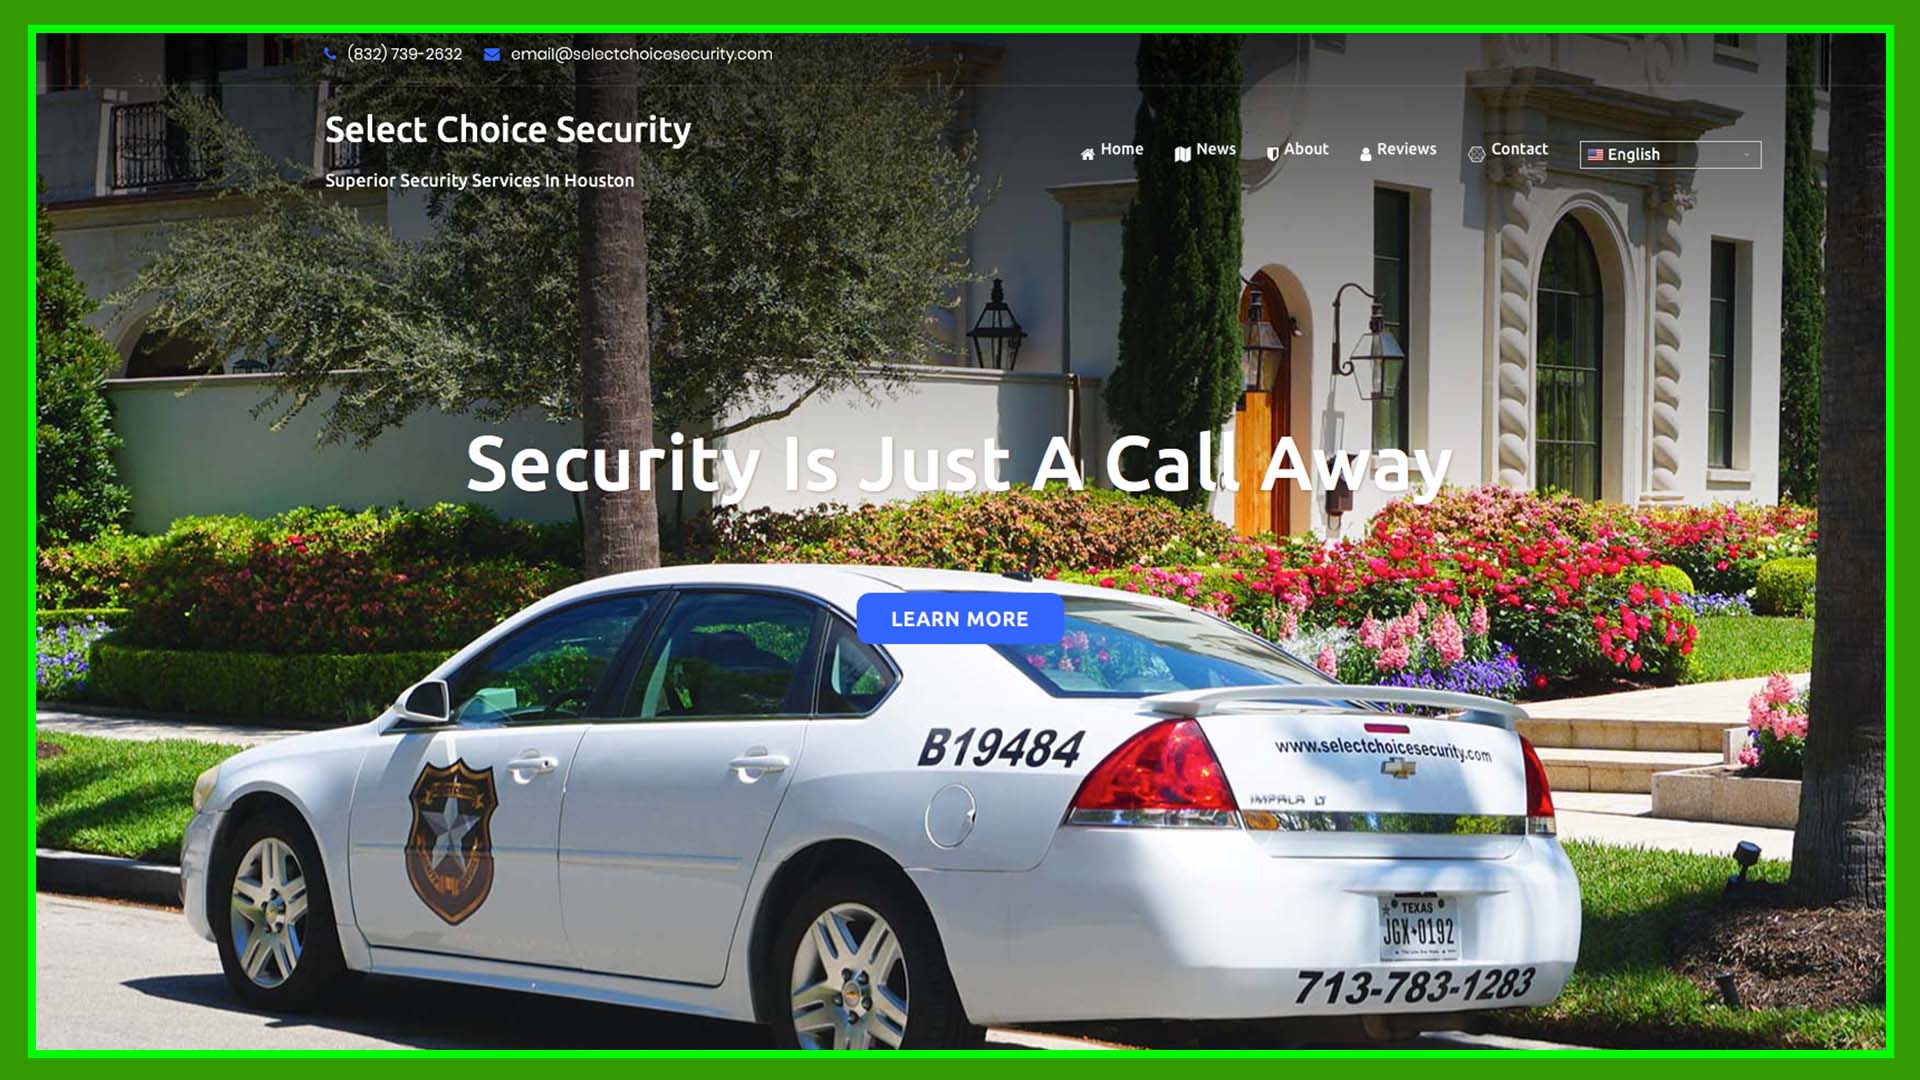 Select Choice Security Services